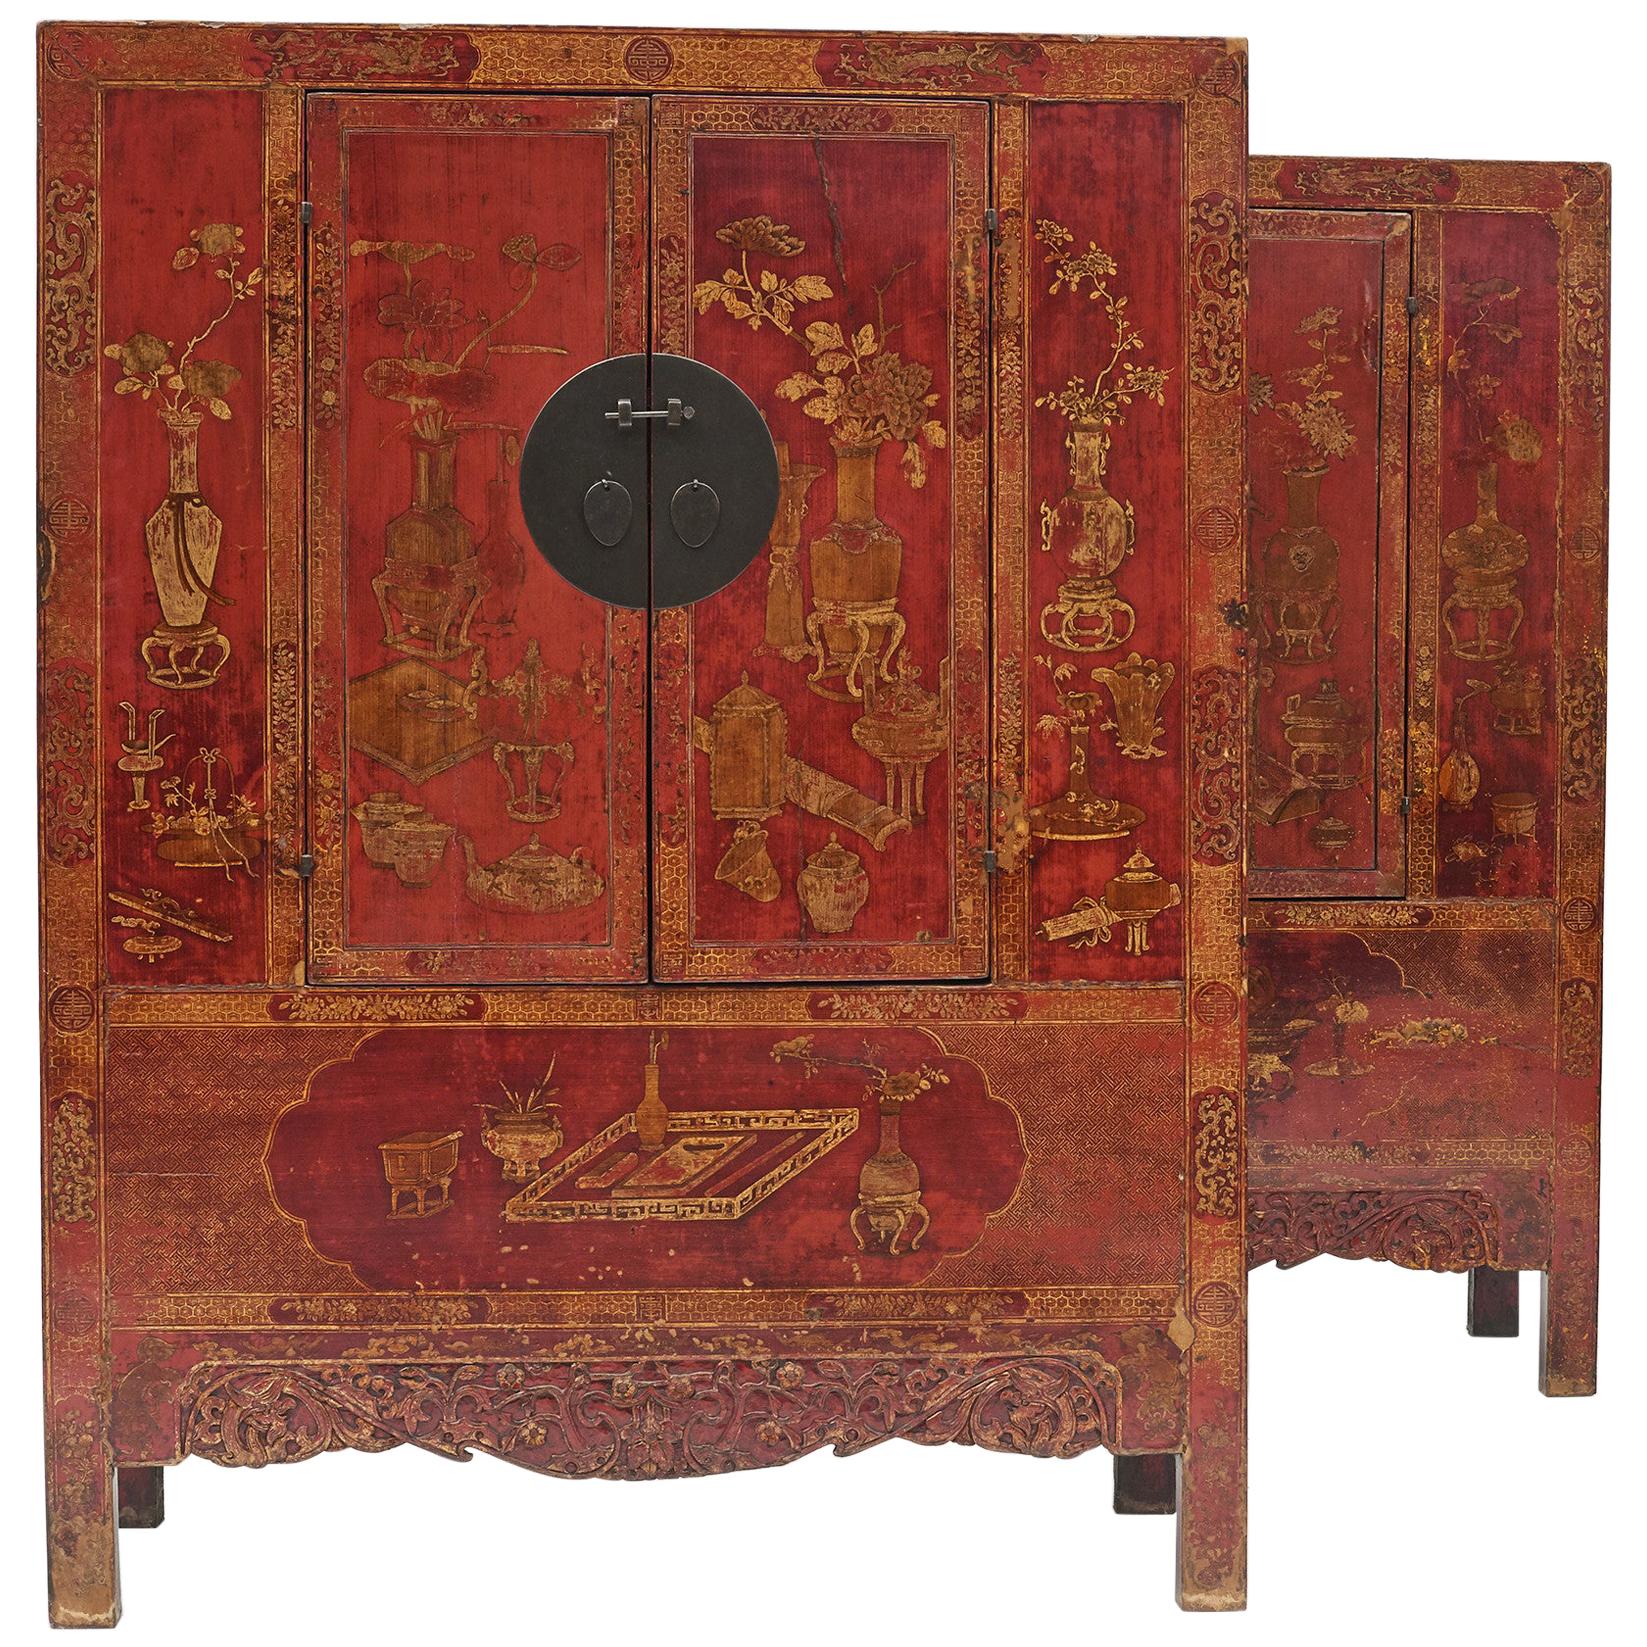 Pair of Late 18th Century Chinese Lacquered Cabinets with Original Decorations